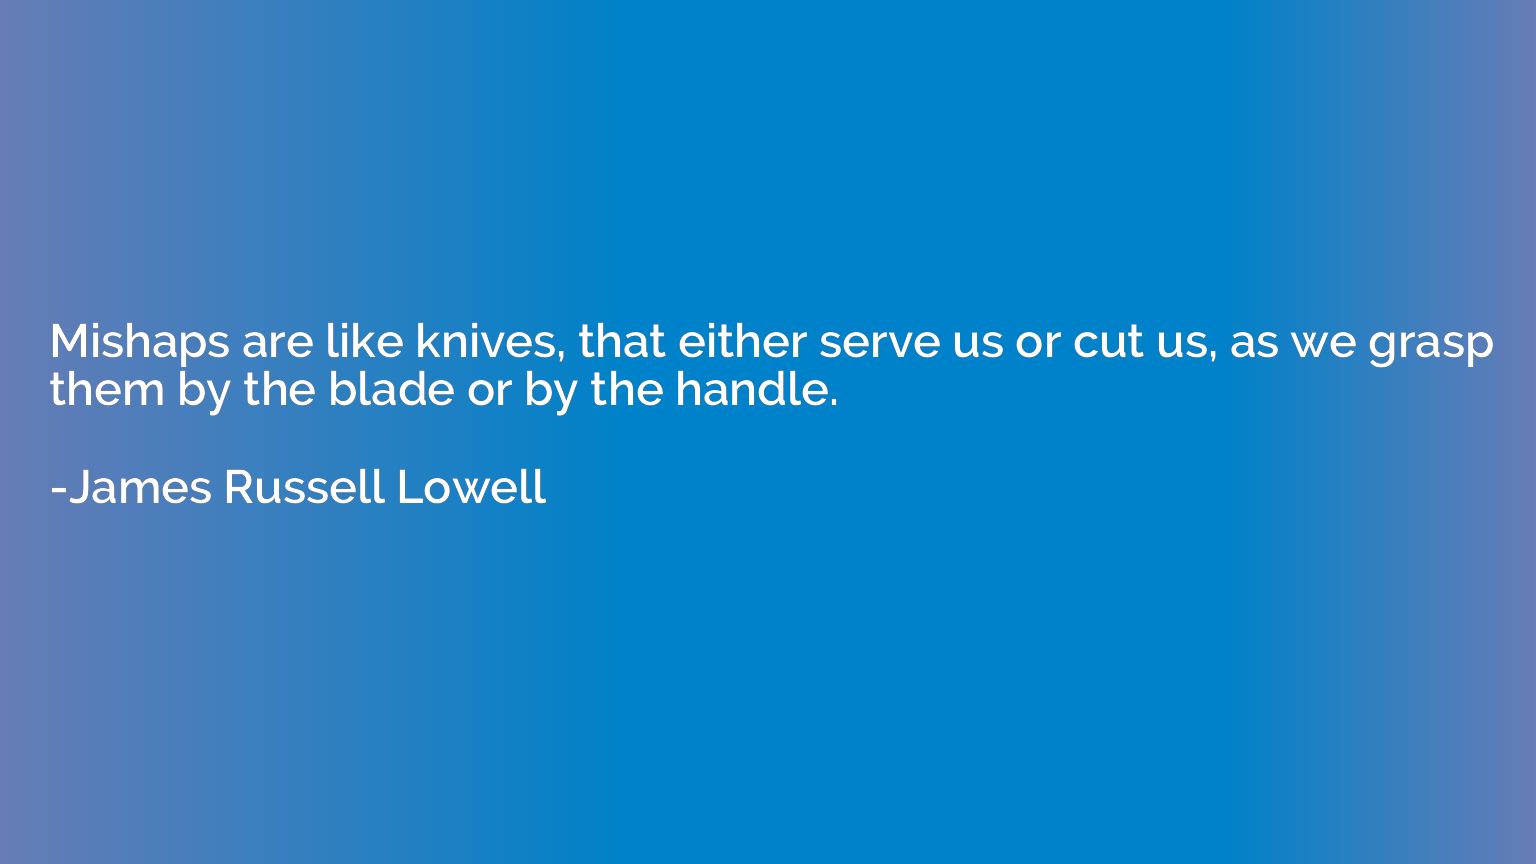 Mishaps are like knives, that either serve us or cut us, as 